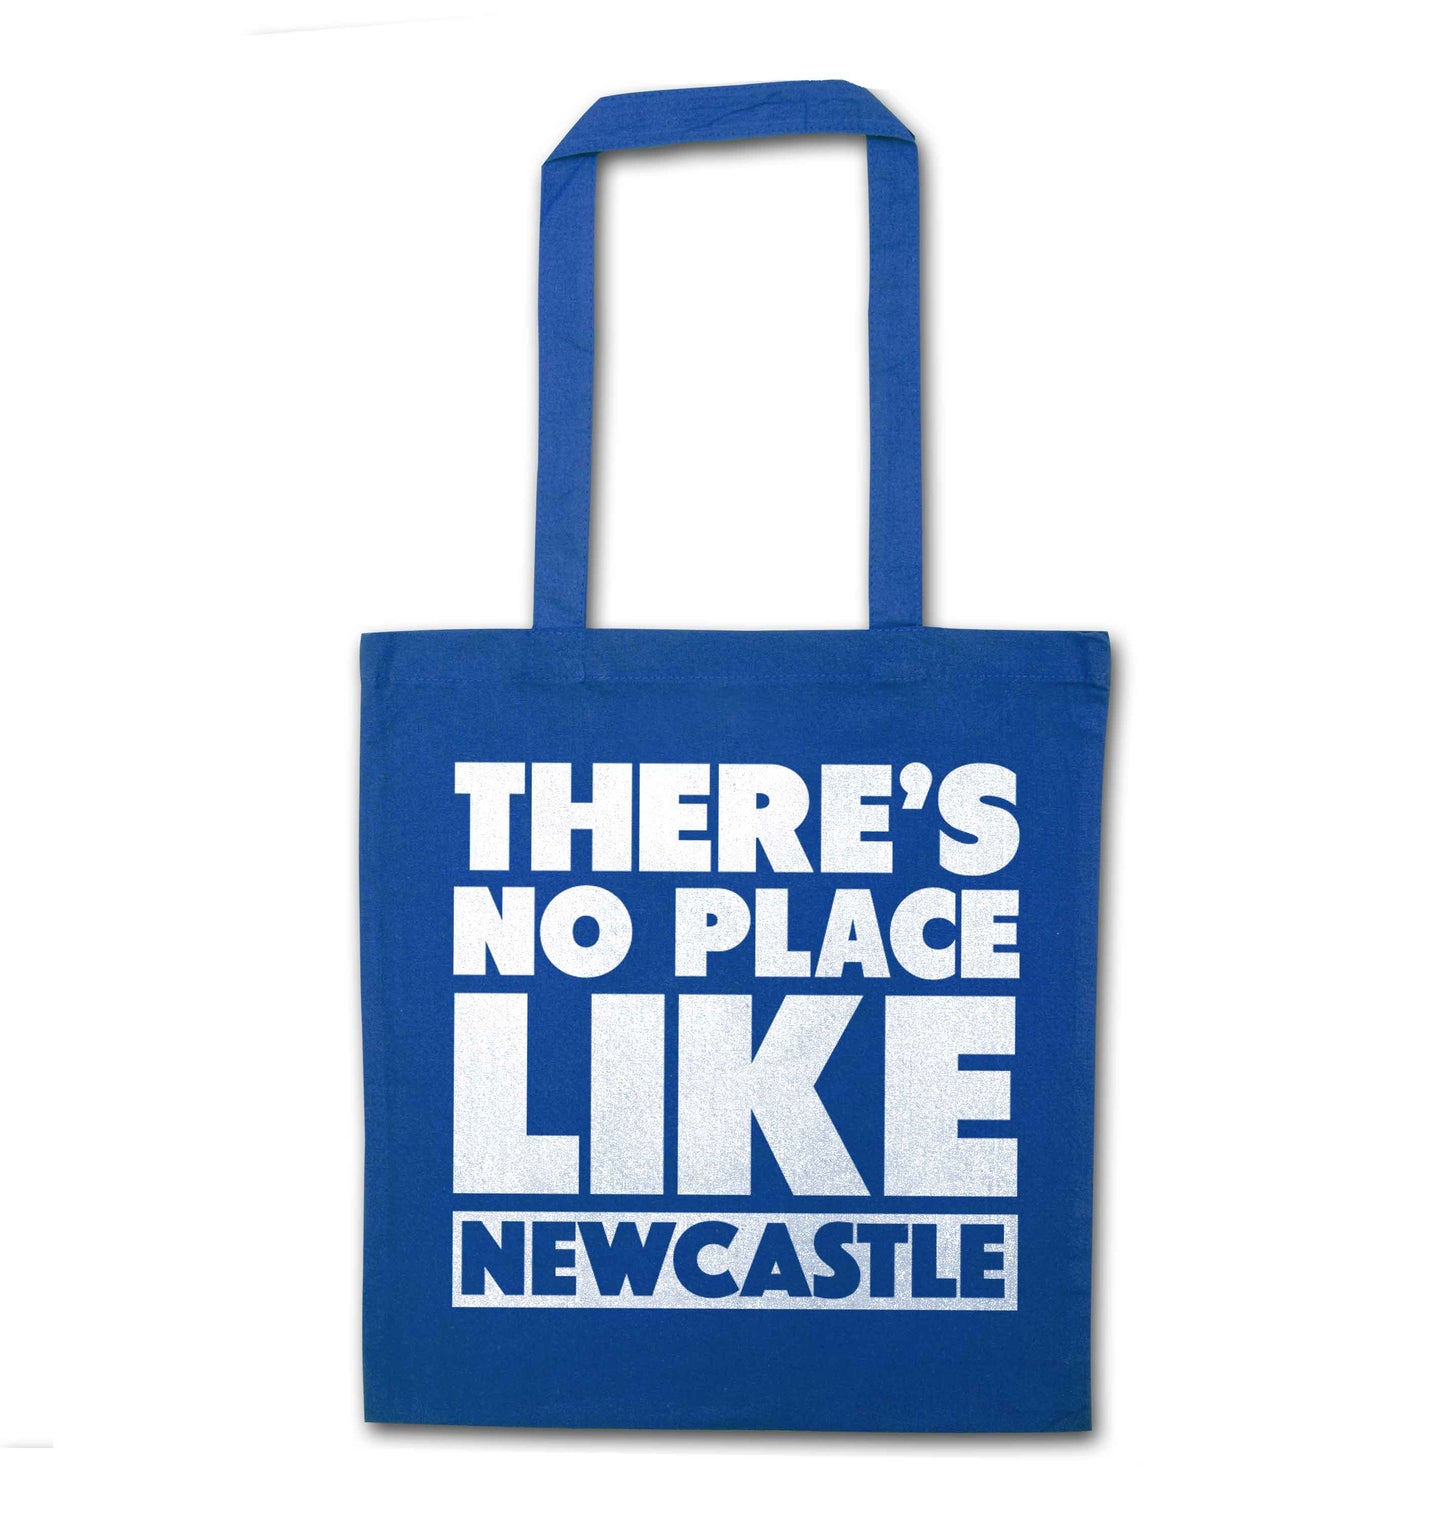 There's no place like Newcastle blue tote bag